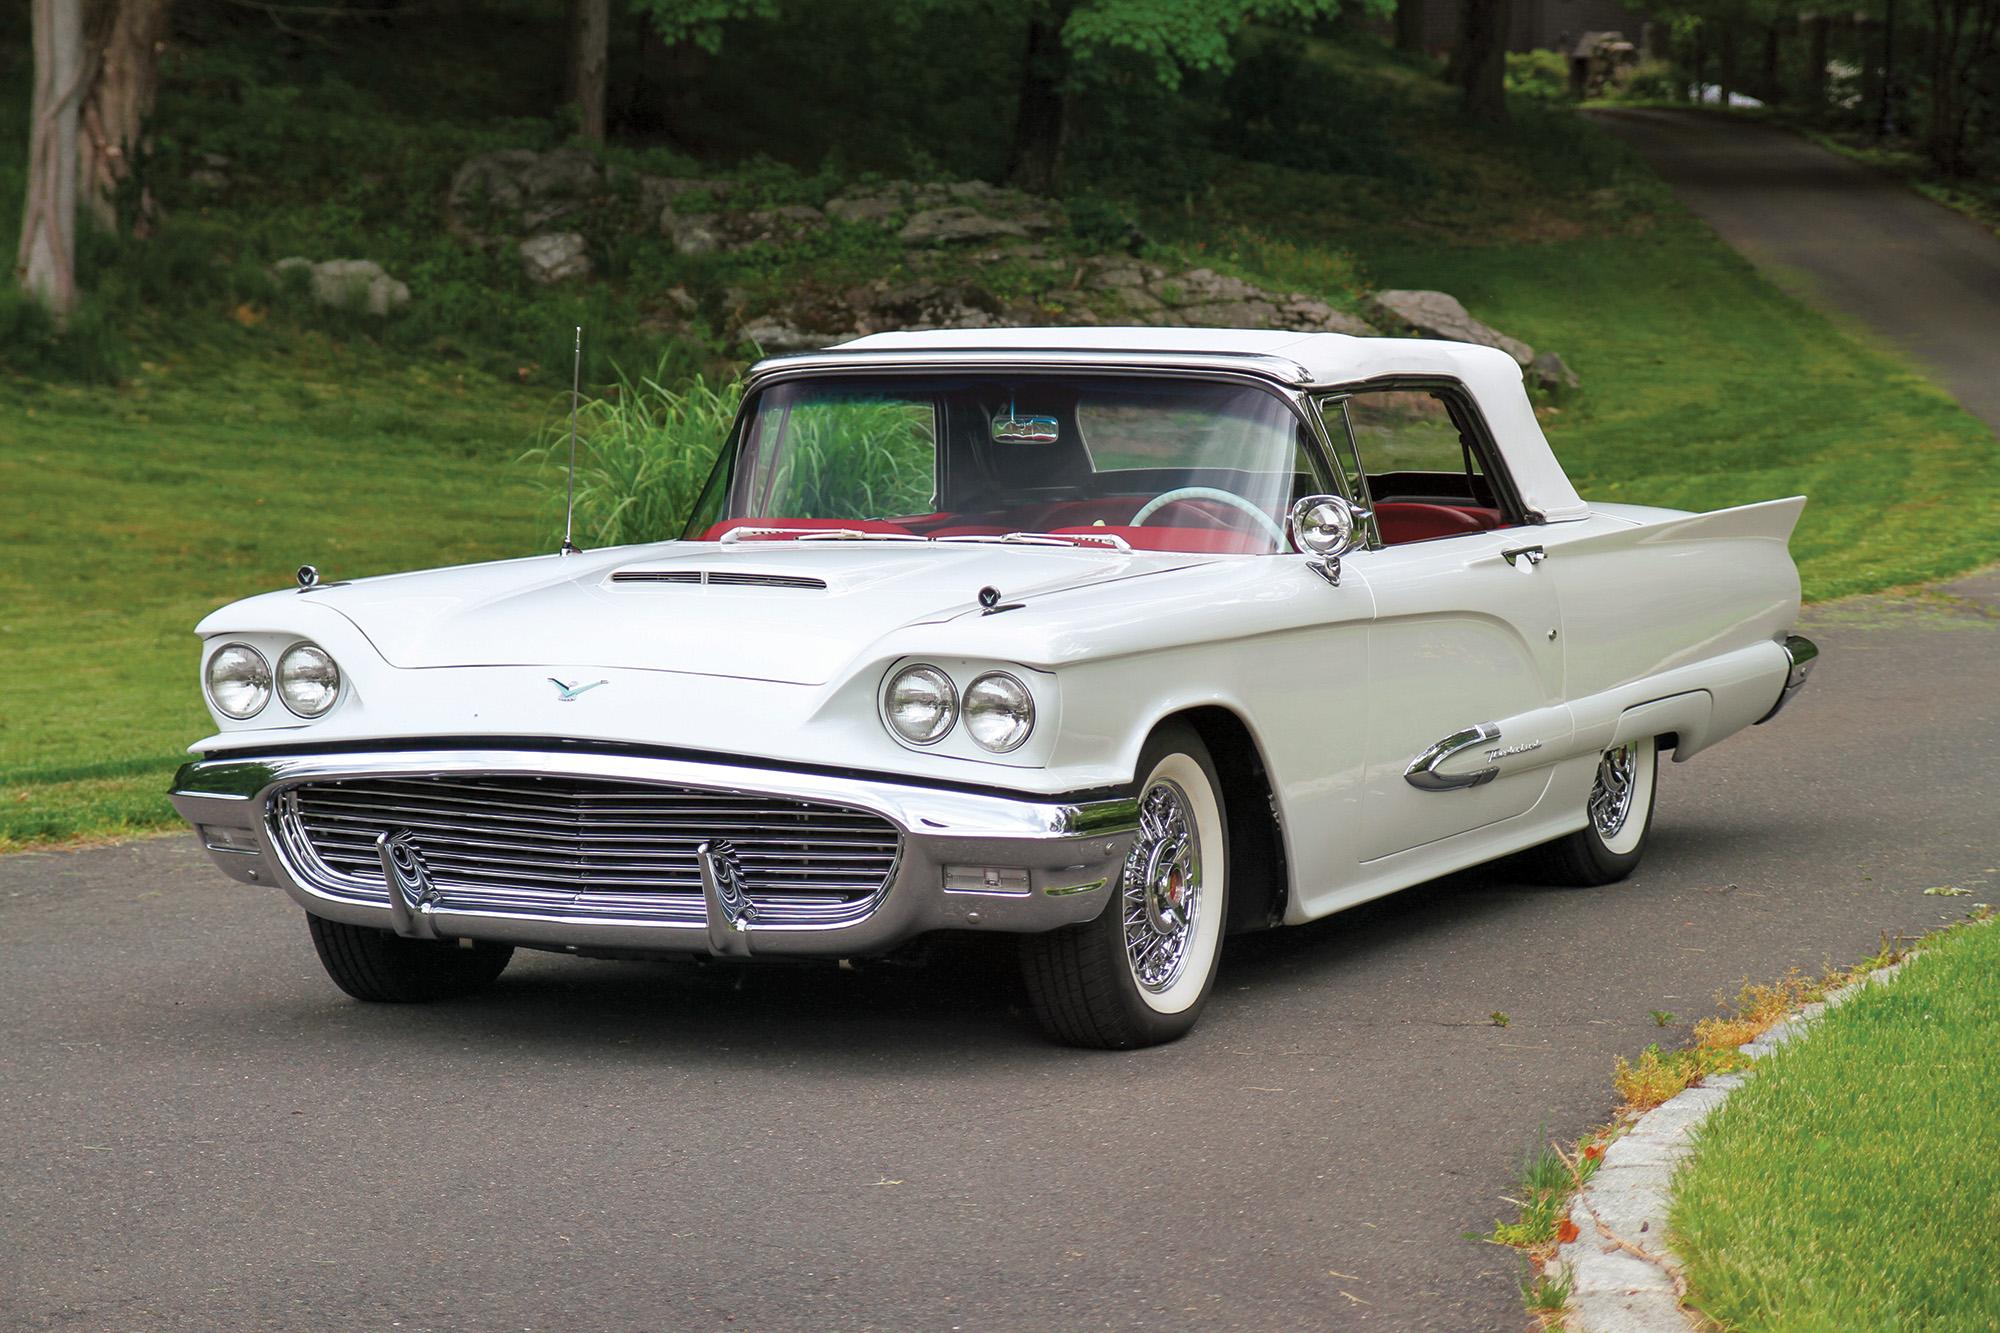 ​Better than Stock, this 1959 Ford Thunderbird is Loaded with NASCAR-Bred Power